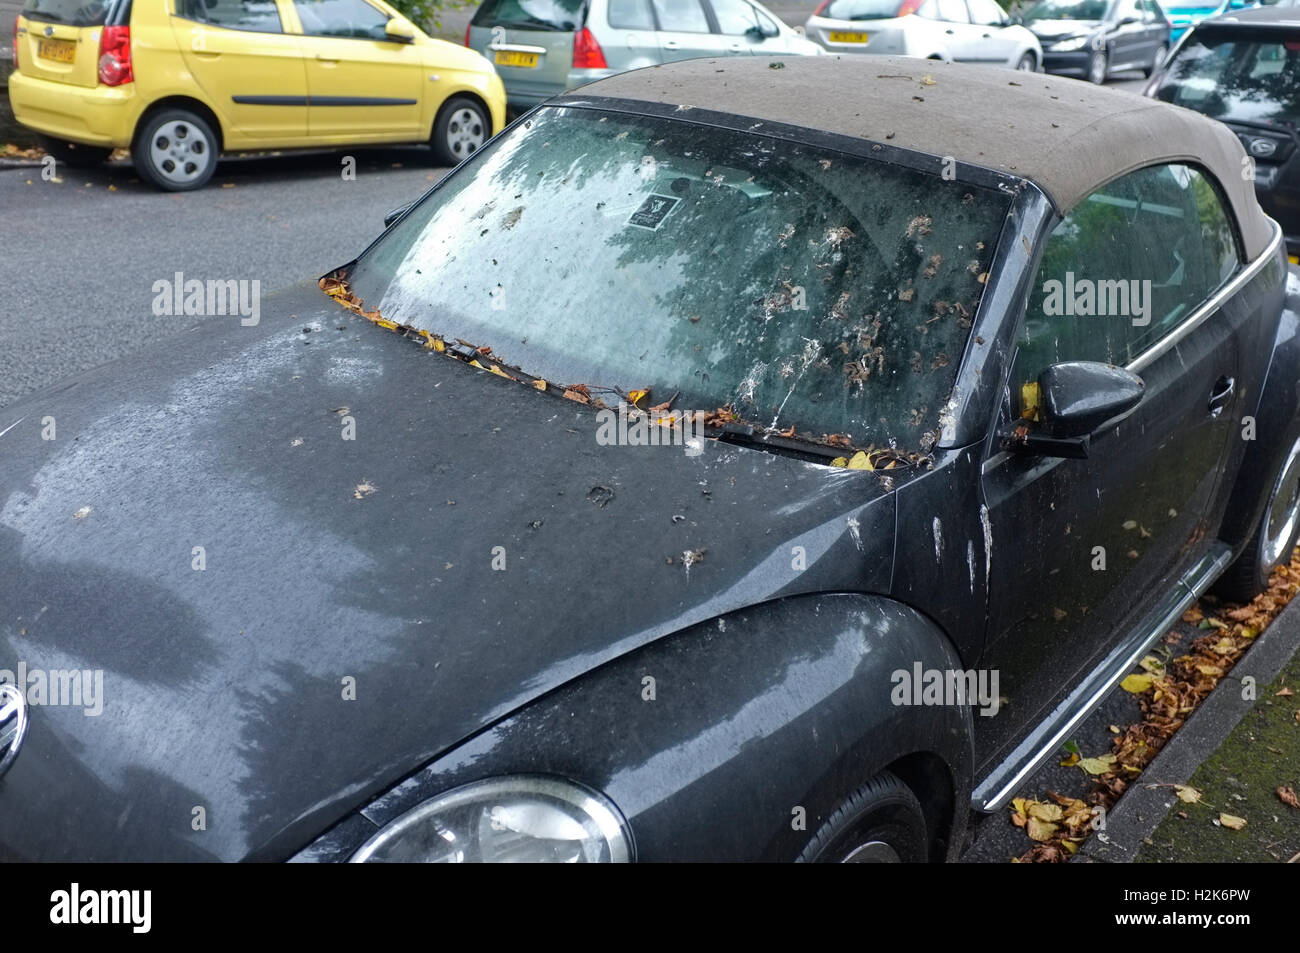 Dirty car in Falmouth, UK Stock Photo